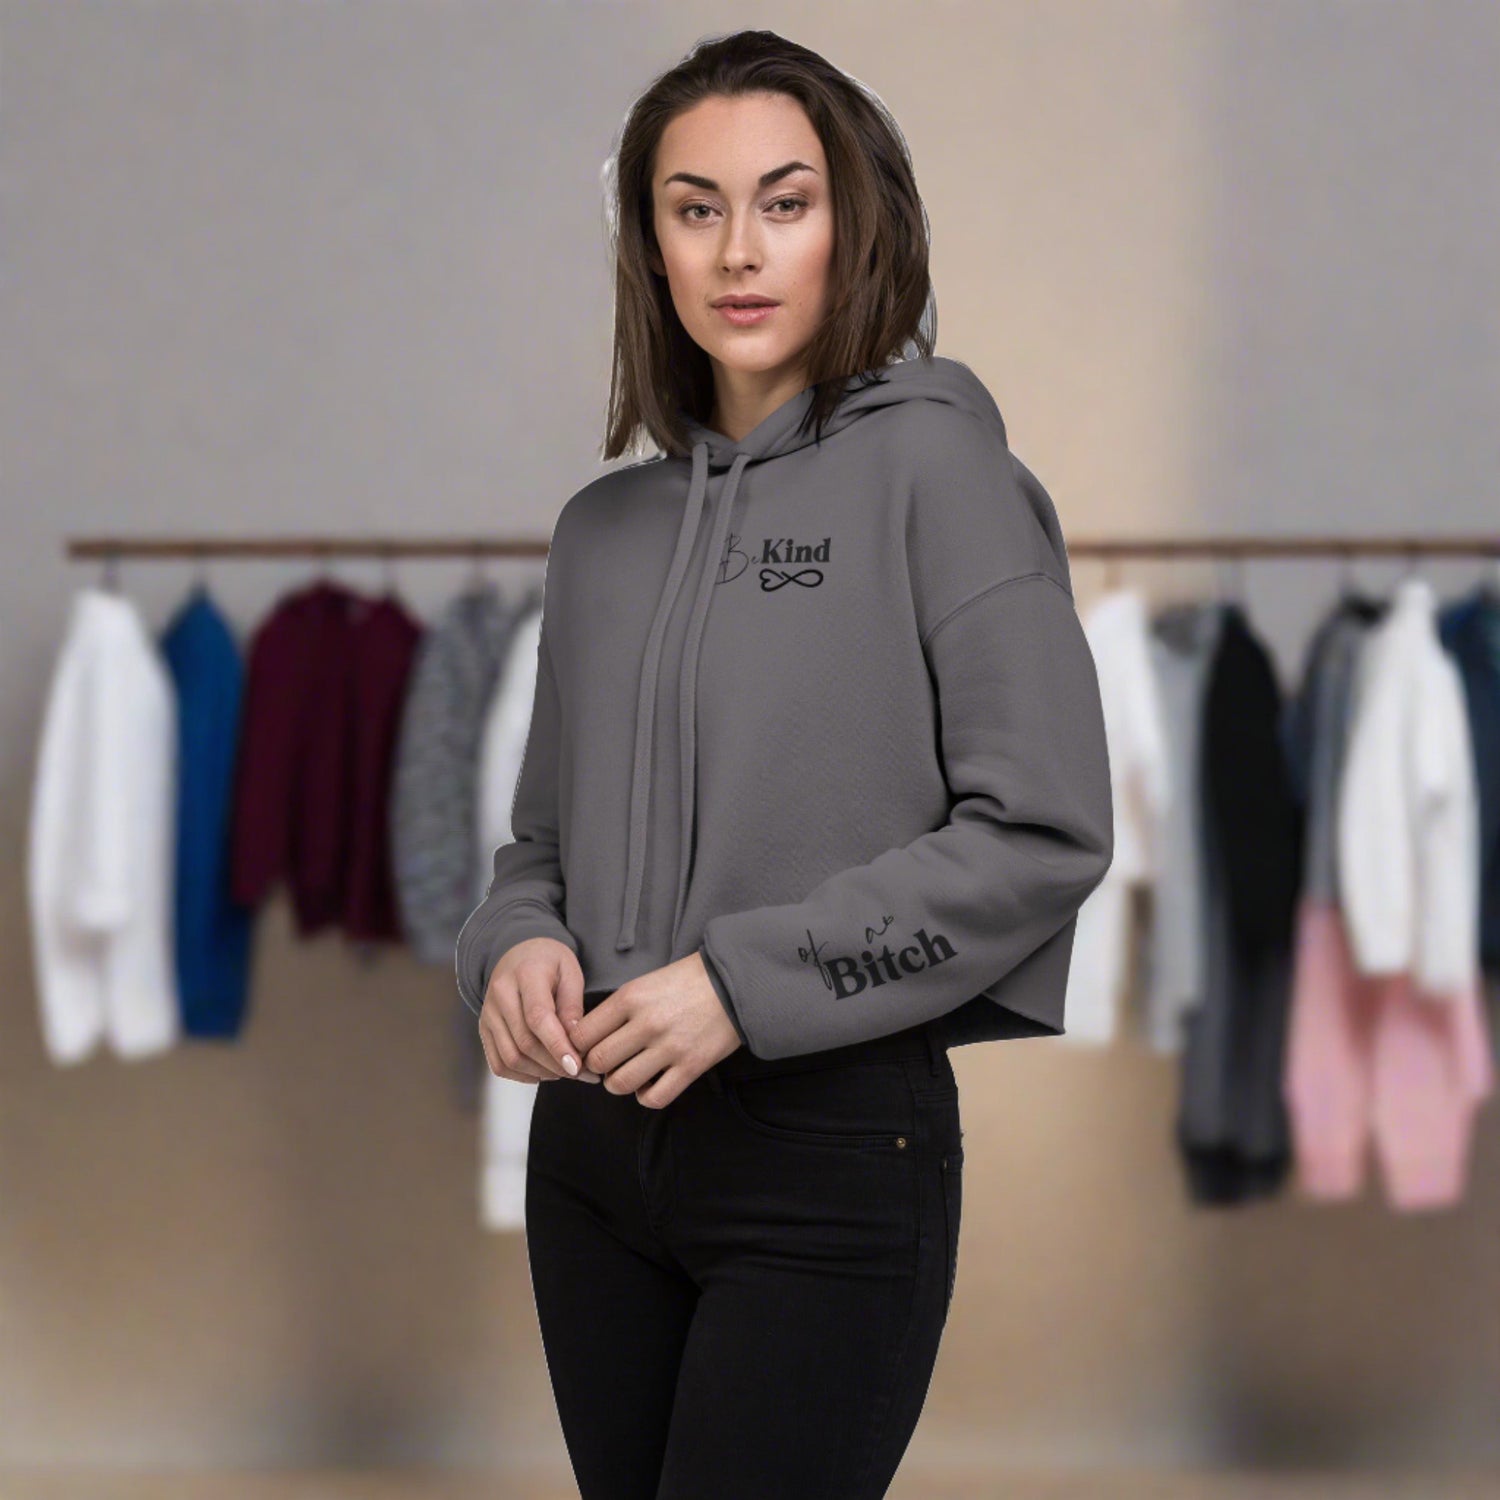 Women's Hoodies, Jackets and Jumper's